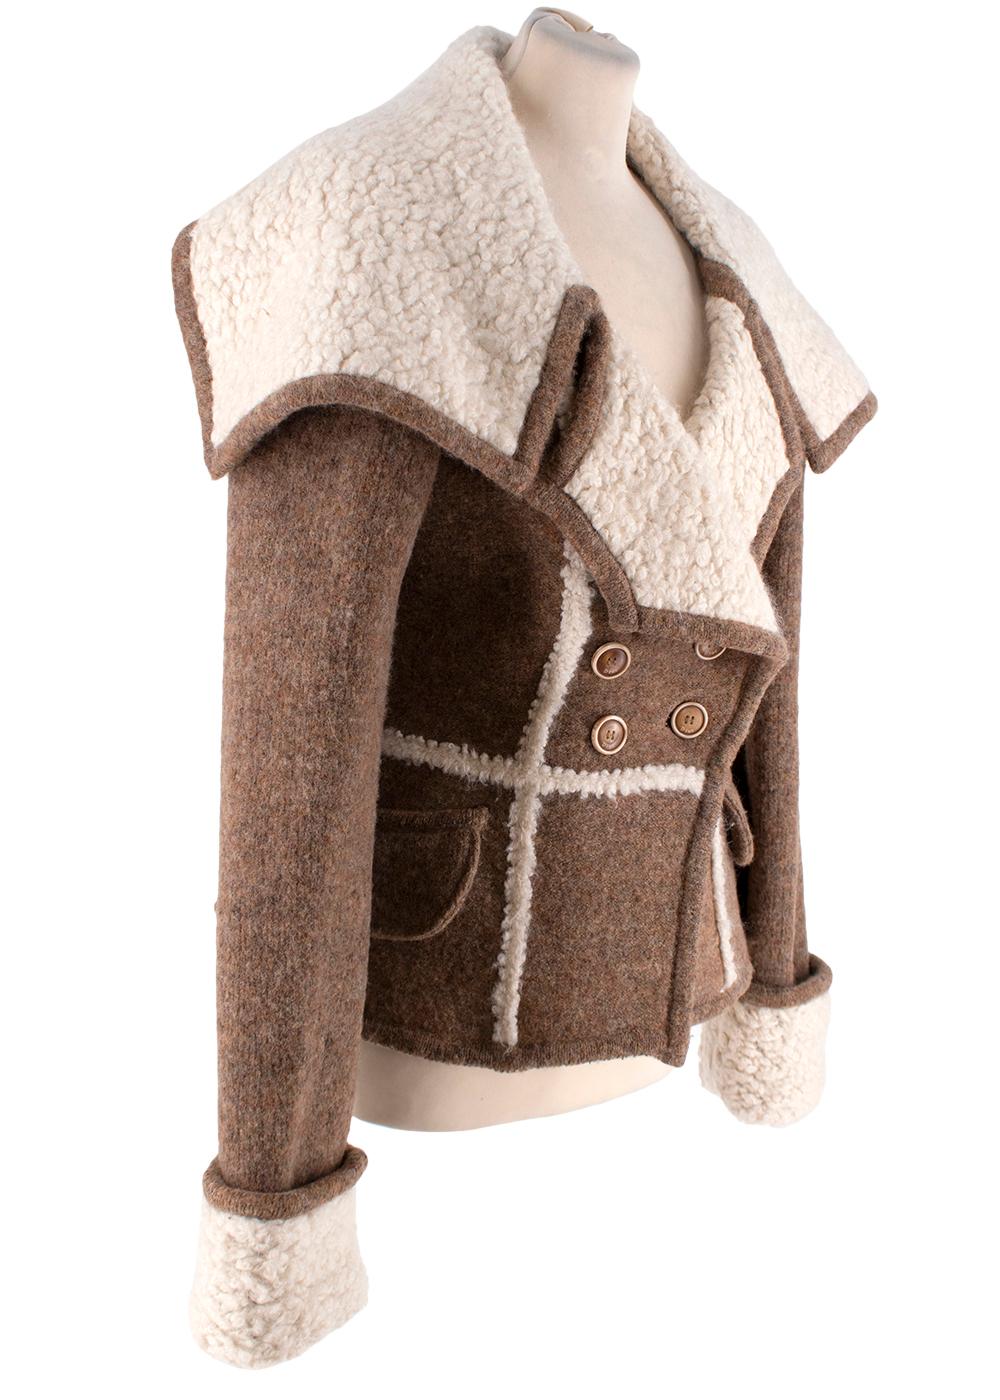 Dior Brown Marl Knitted Aviator Jacket

- Riff on the classic aviator jacket, crafted from brown marl wool-blend, with ivory textured boucle revere
- Double-breasted with 4 button fastening
- Wide, exaggerated lapels 
- Sharply tailored akin to the